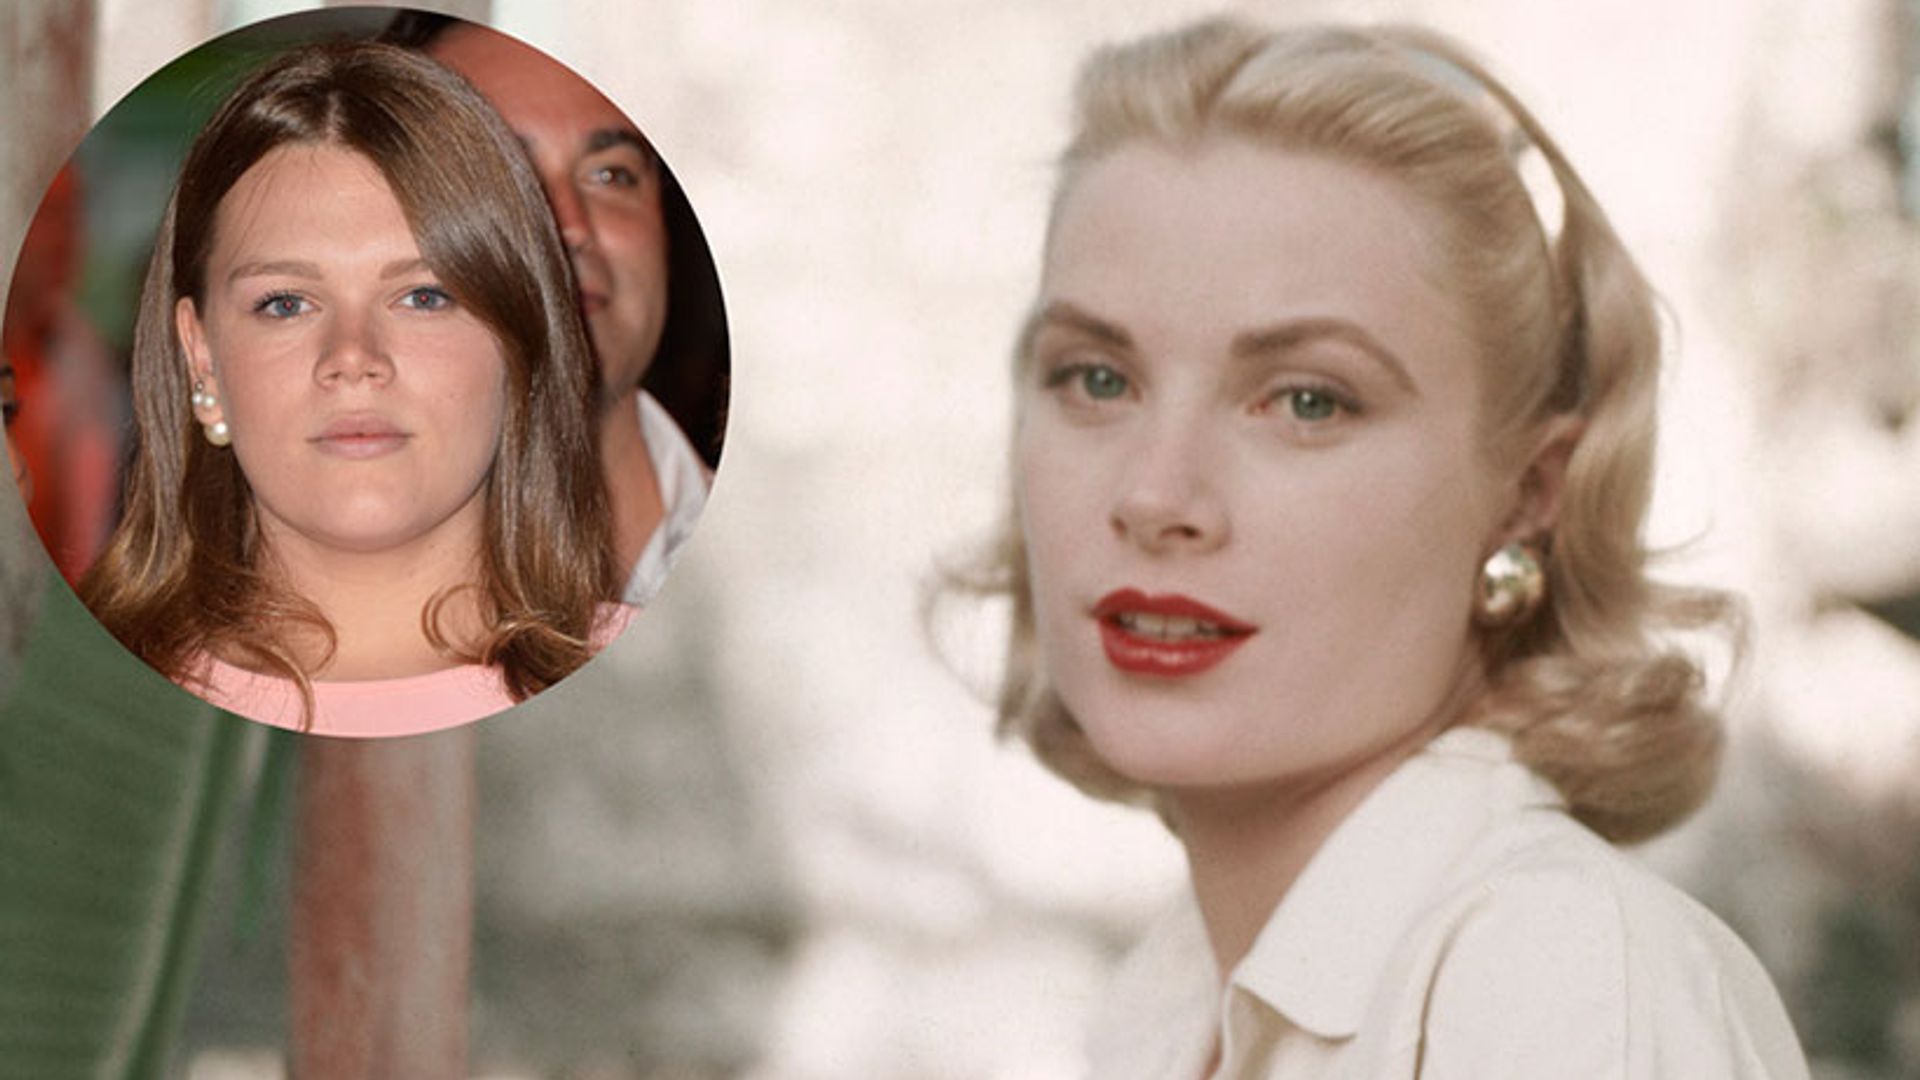 Princess Grace Kelly’s 19-year-old granddaughter has 'style icon' moment